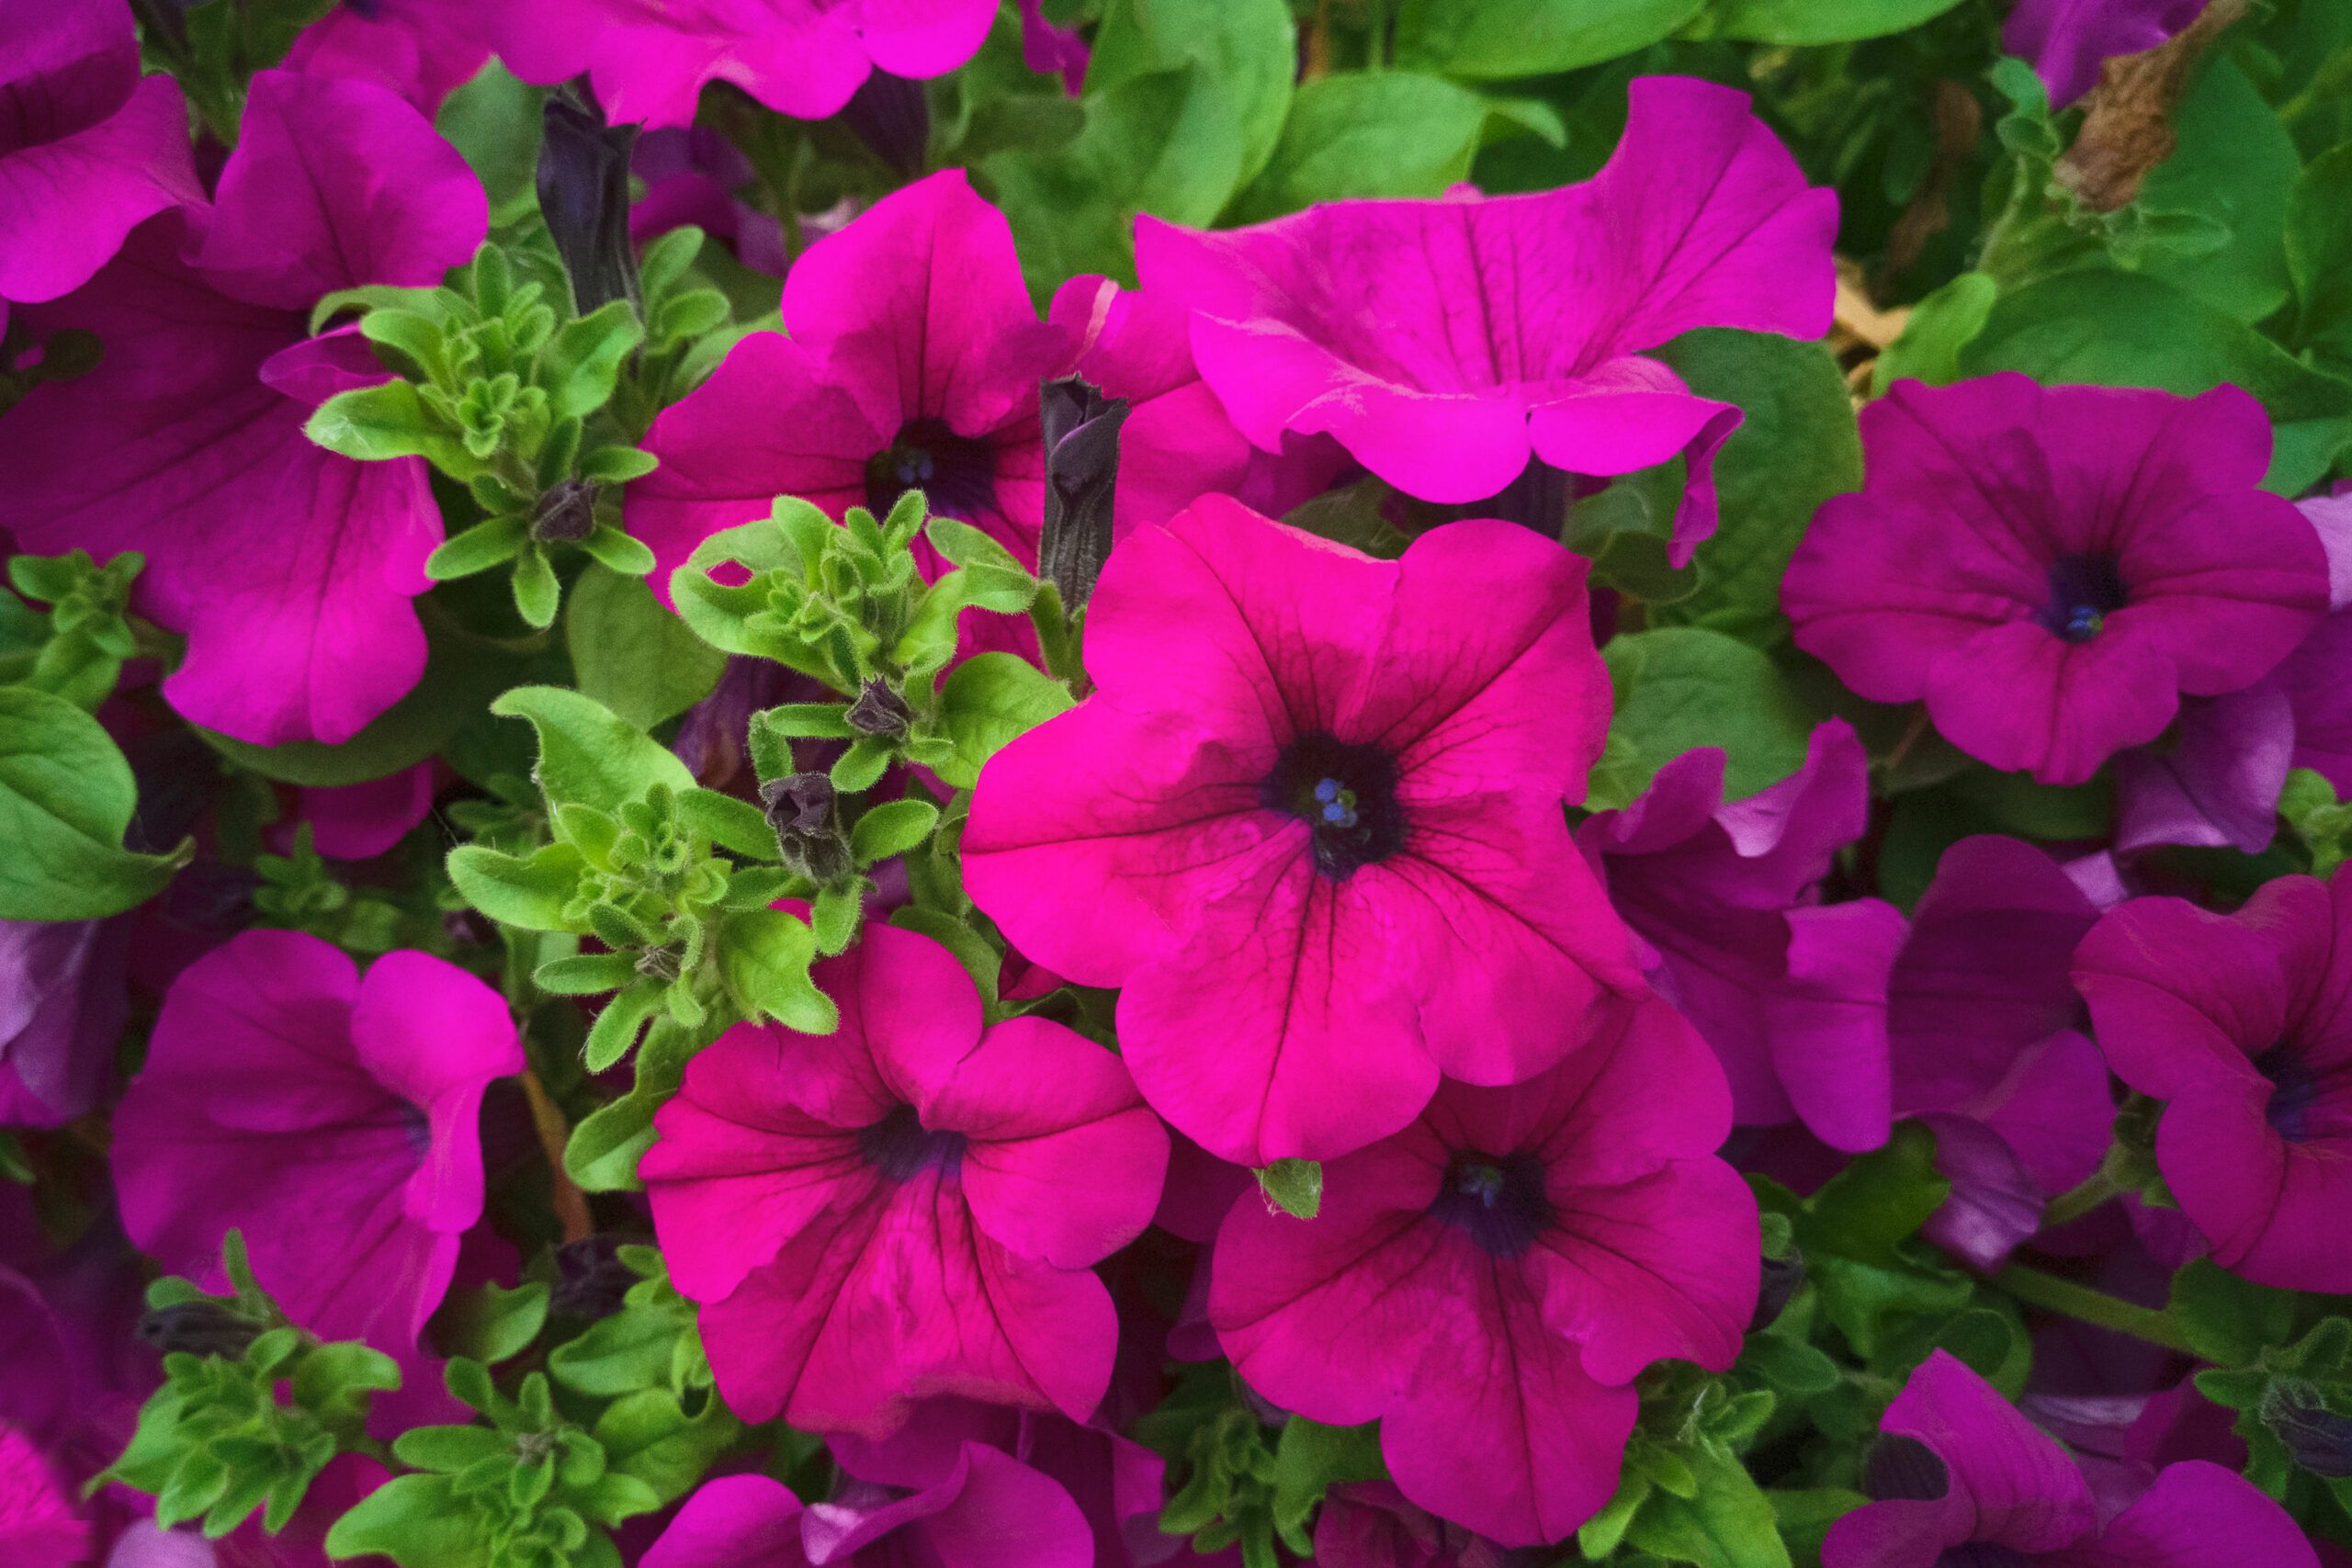 Image of Petunia annual flower that blooms all summer